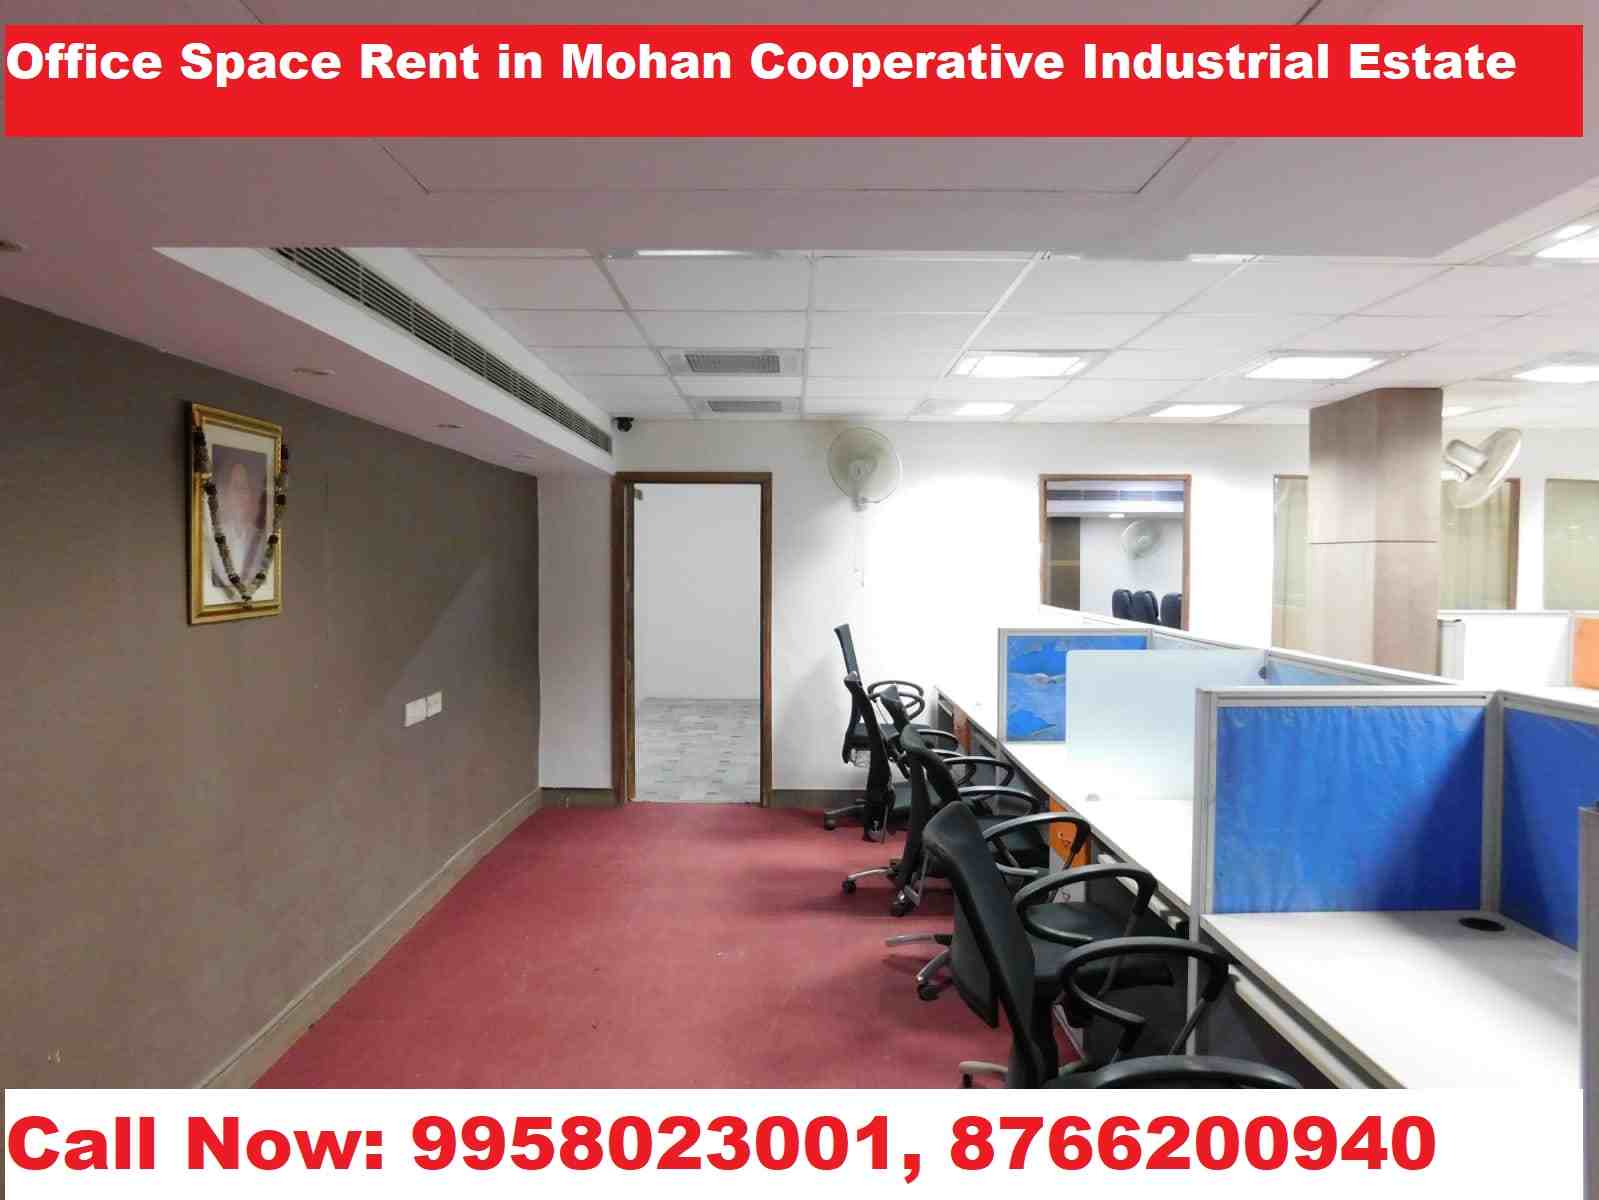 Office Space Rent in Mohan Cooperative Industrial Estate